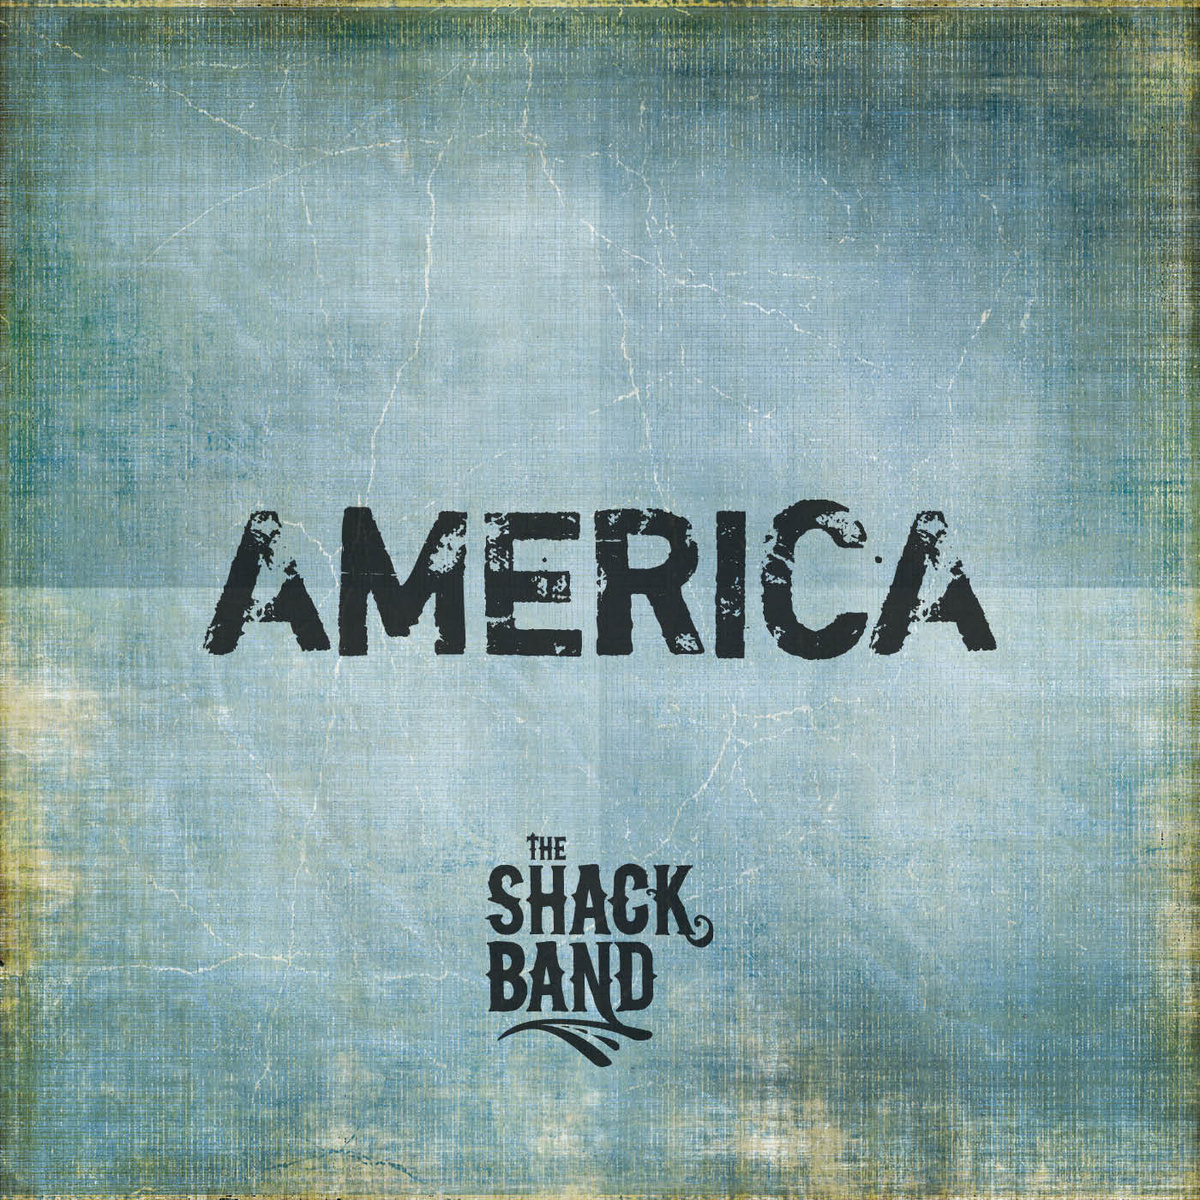 CLICK HERE TO LISTEN TO THE SHACK BAND'S NEW ALBUM